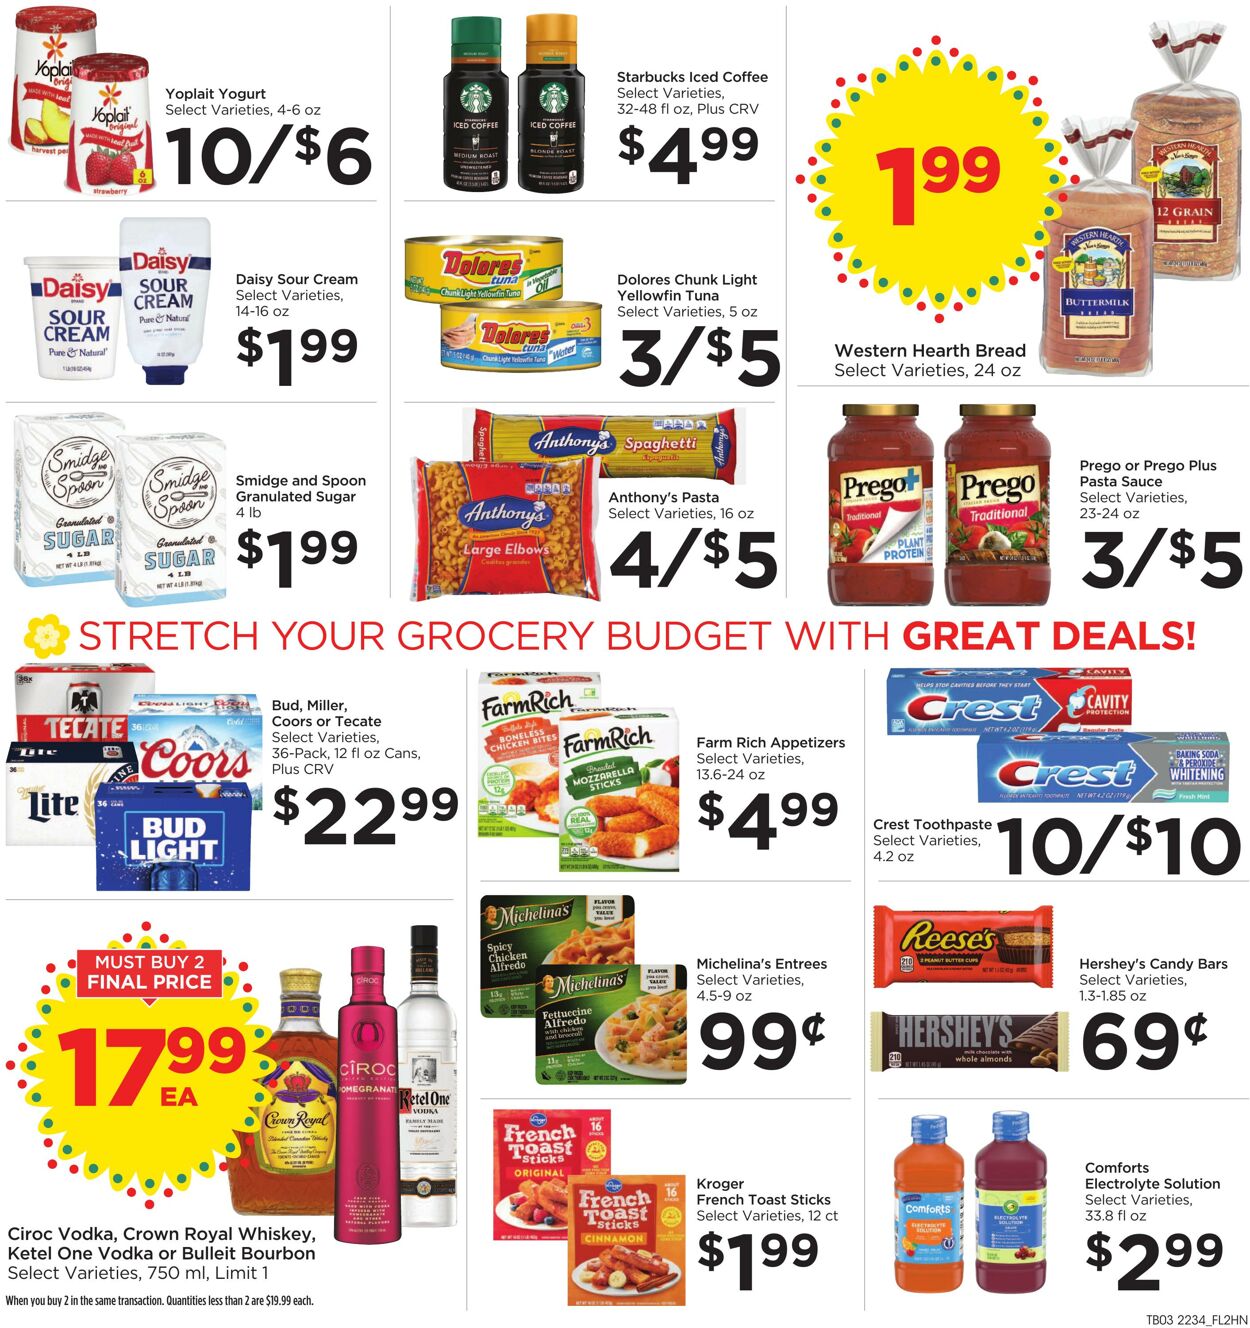 Weekly ad Foods Co 09/21/2022 - 09/27/2022